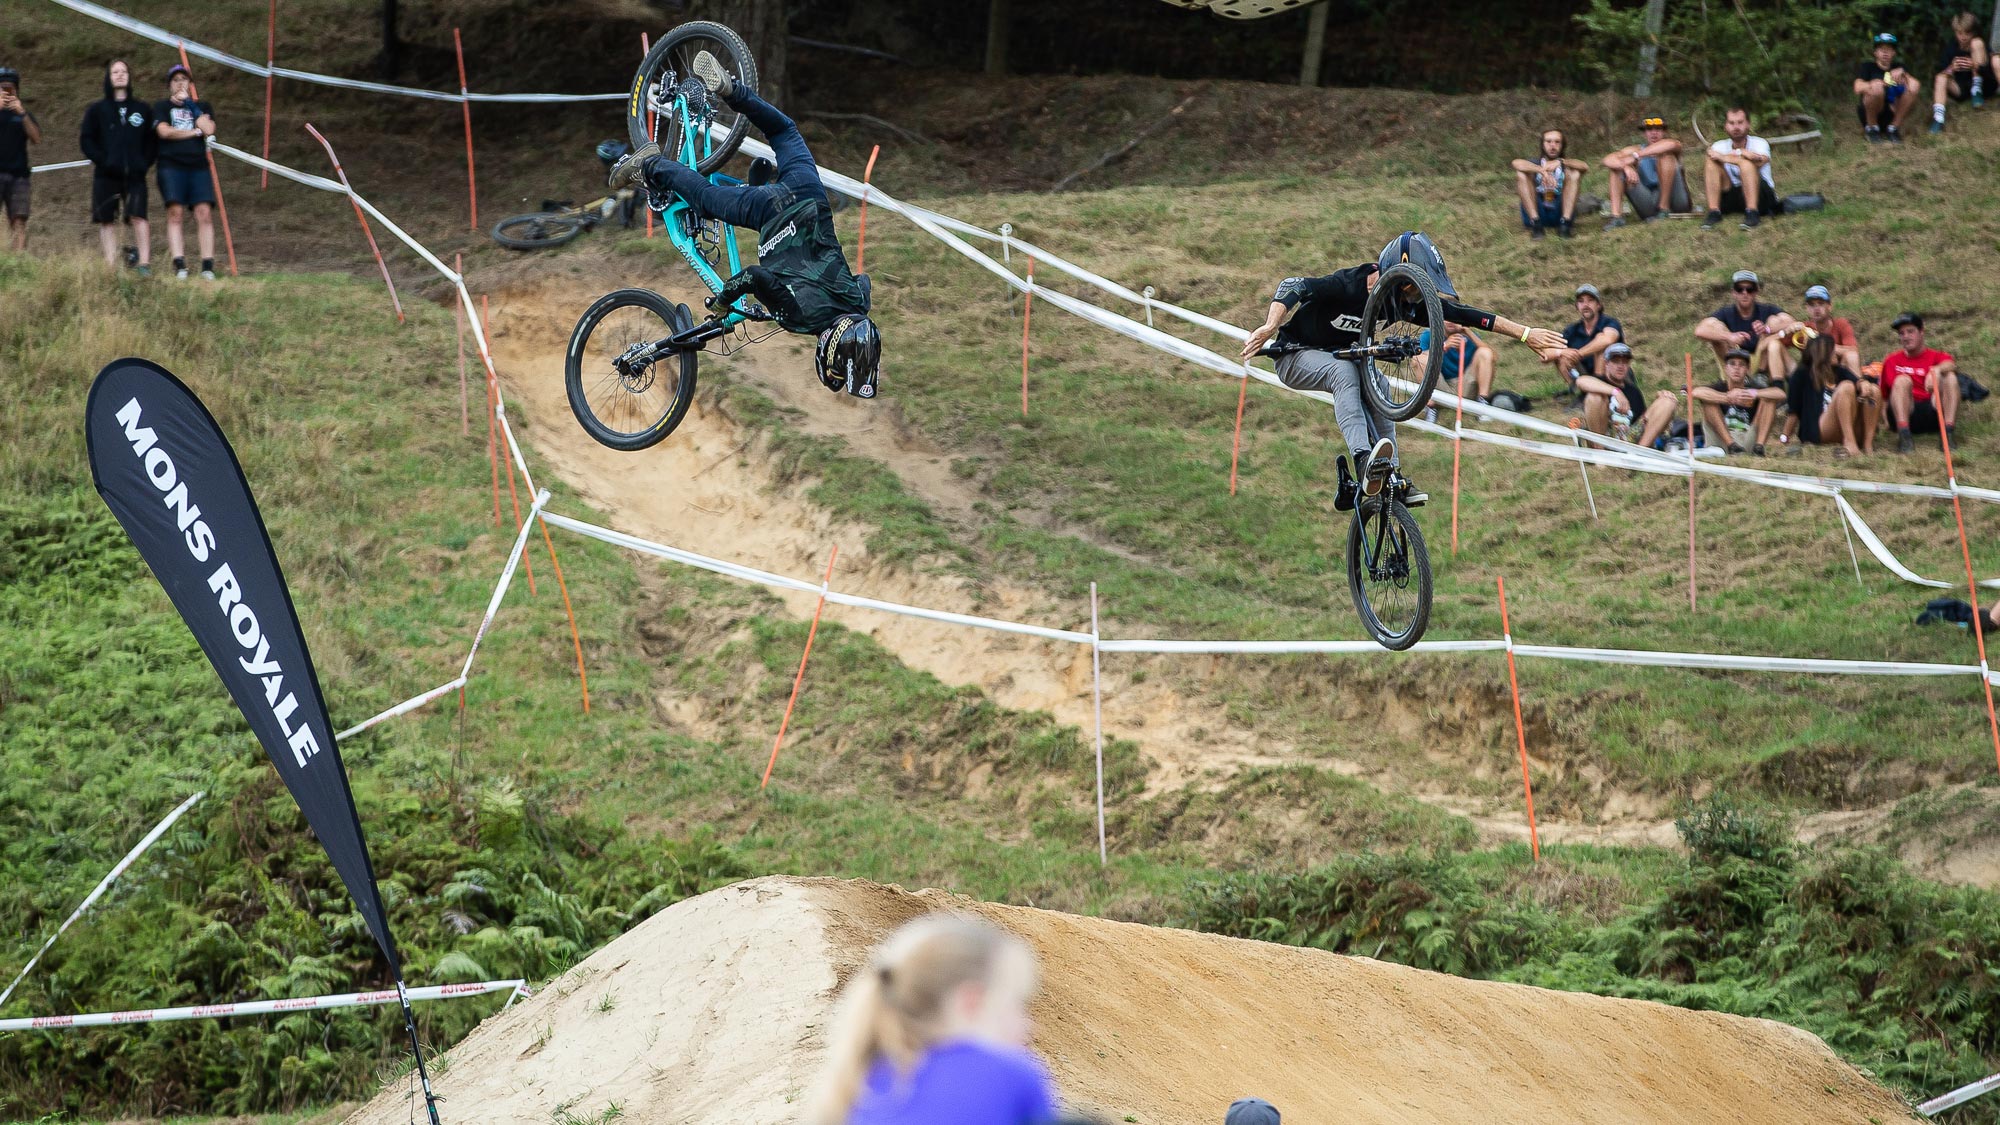 Newcomer beats the old guard for the win at Speed & Style at Crankworx Rotorua.